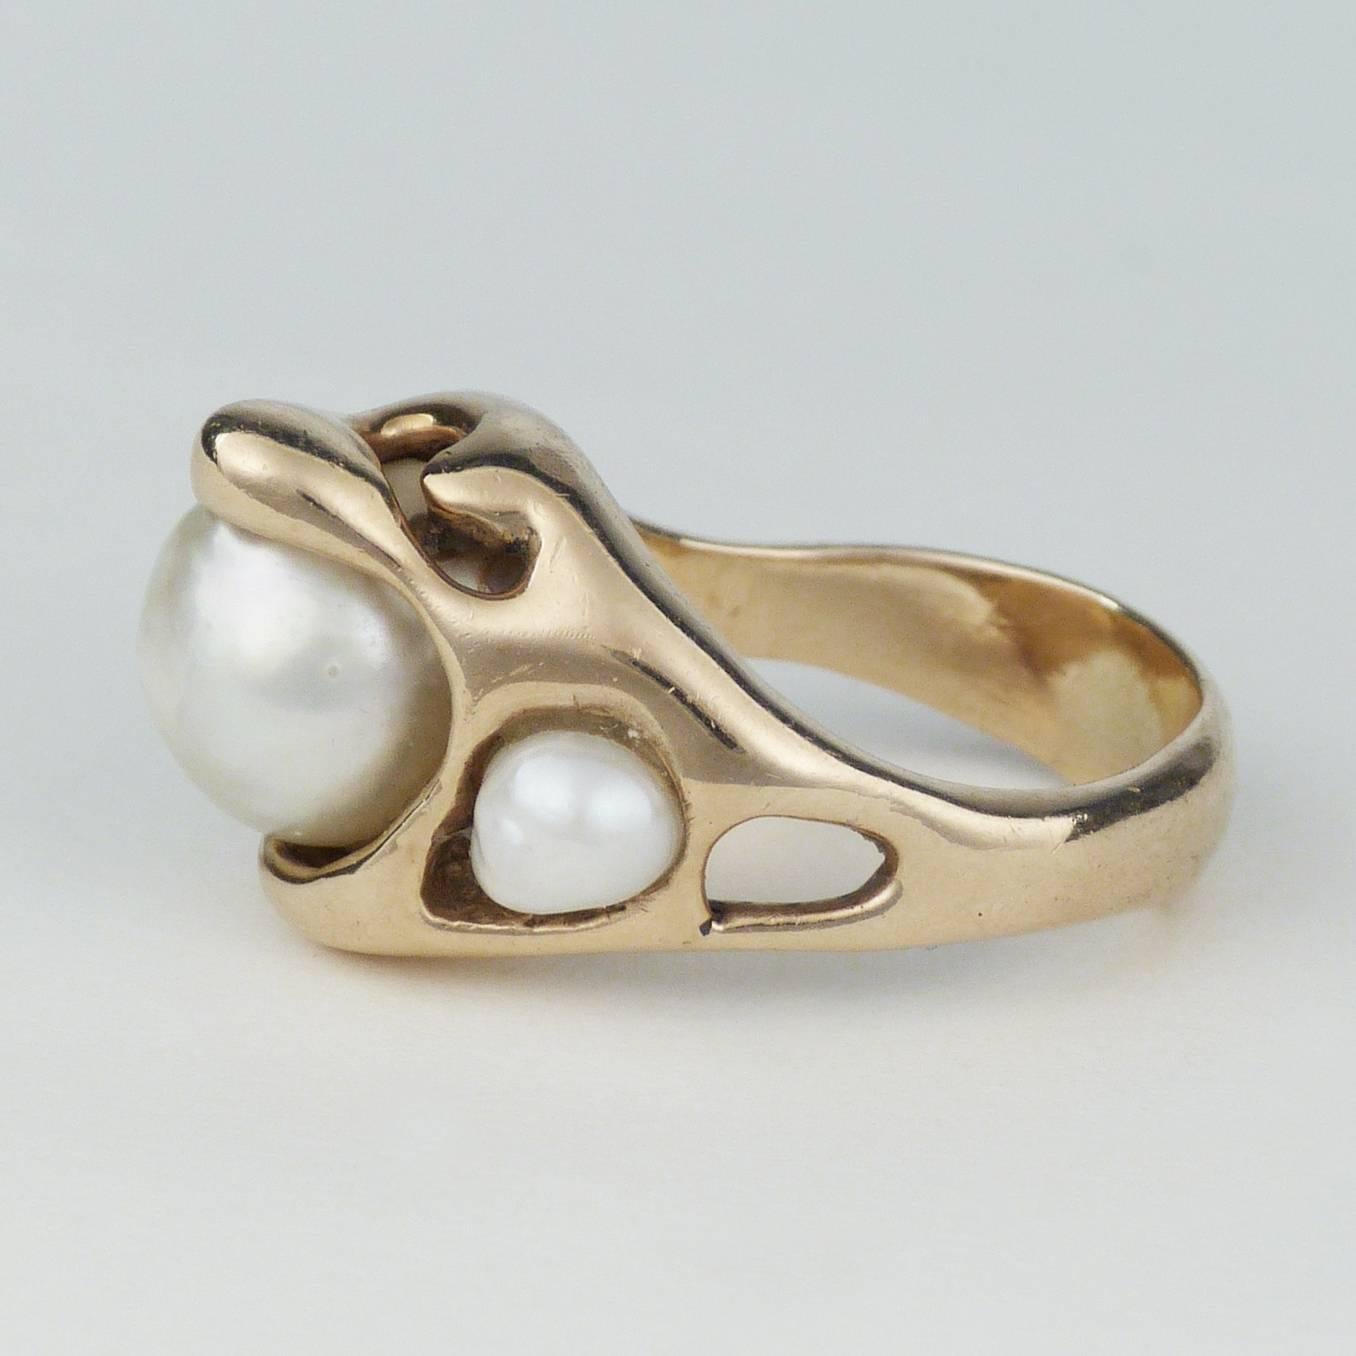 Cast Gold and Pearl Ring by Charles Loloma, circa 1980